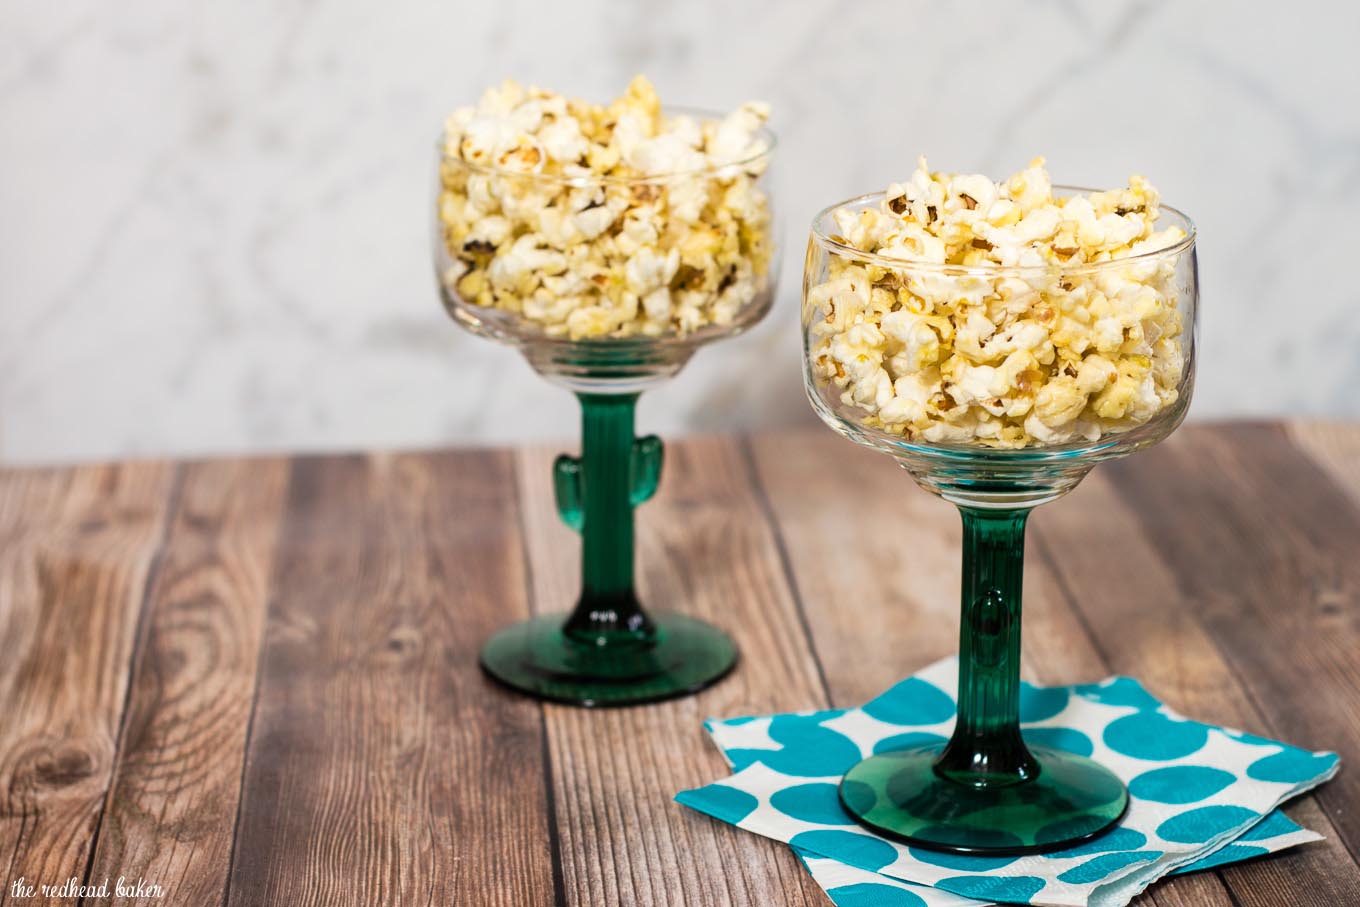 Indulge in an adult snack — margarita popcorn, coated in butter flavored with tequila and lime juice. It's so easy to make! #SundaySupper